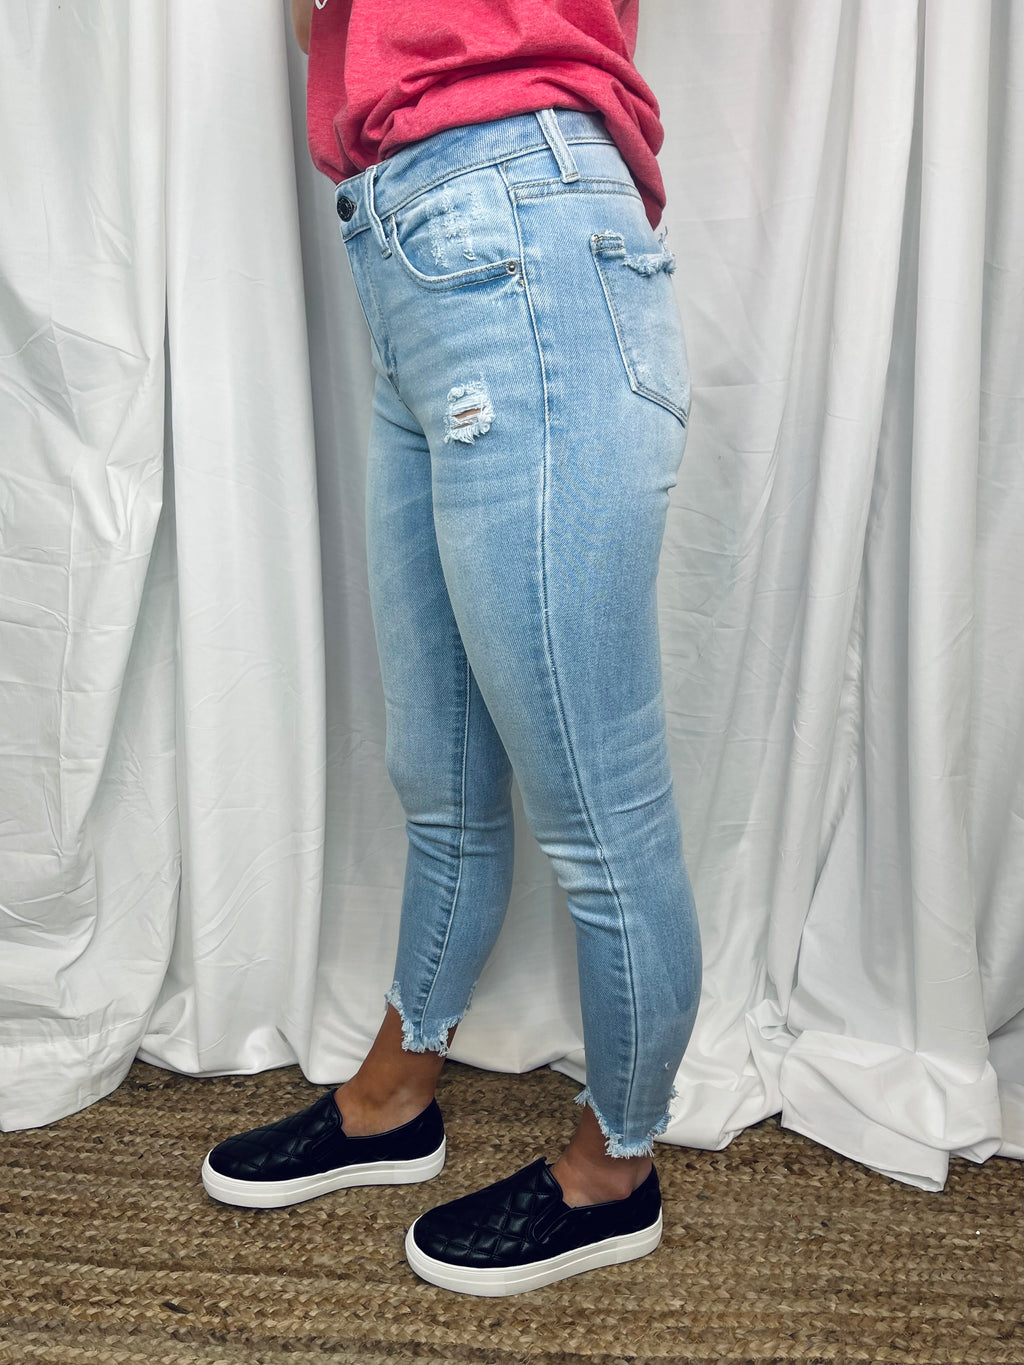 Jeans feature a light wash denim. mid rise waist, skinny leg, frayed bottom hem, functional pockets and runs true to size!   -Aubree is 5'2 and wore a size 13  -Carrington is 5"1 and wore a size 1